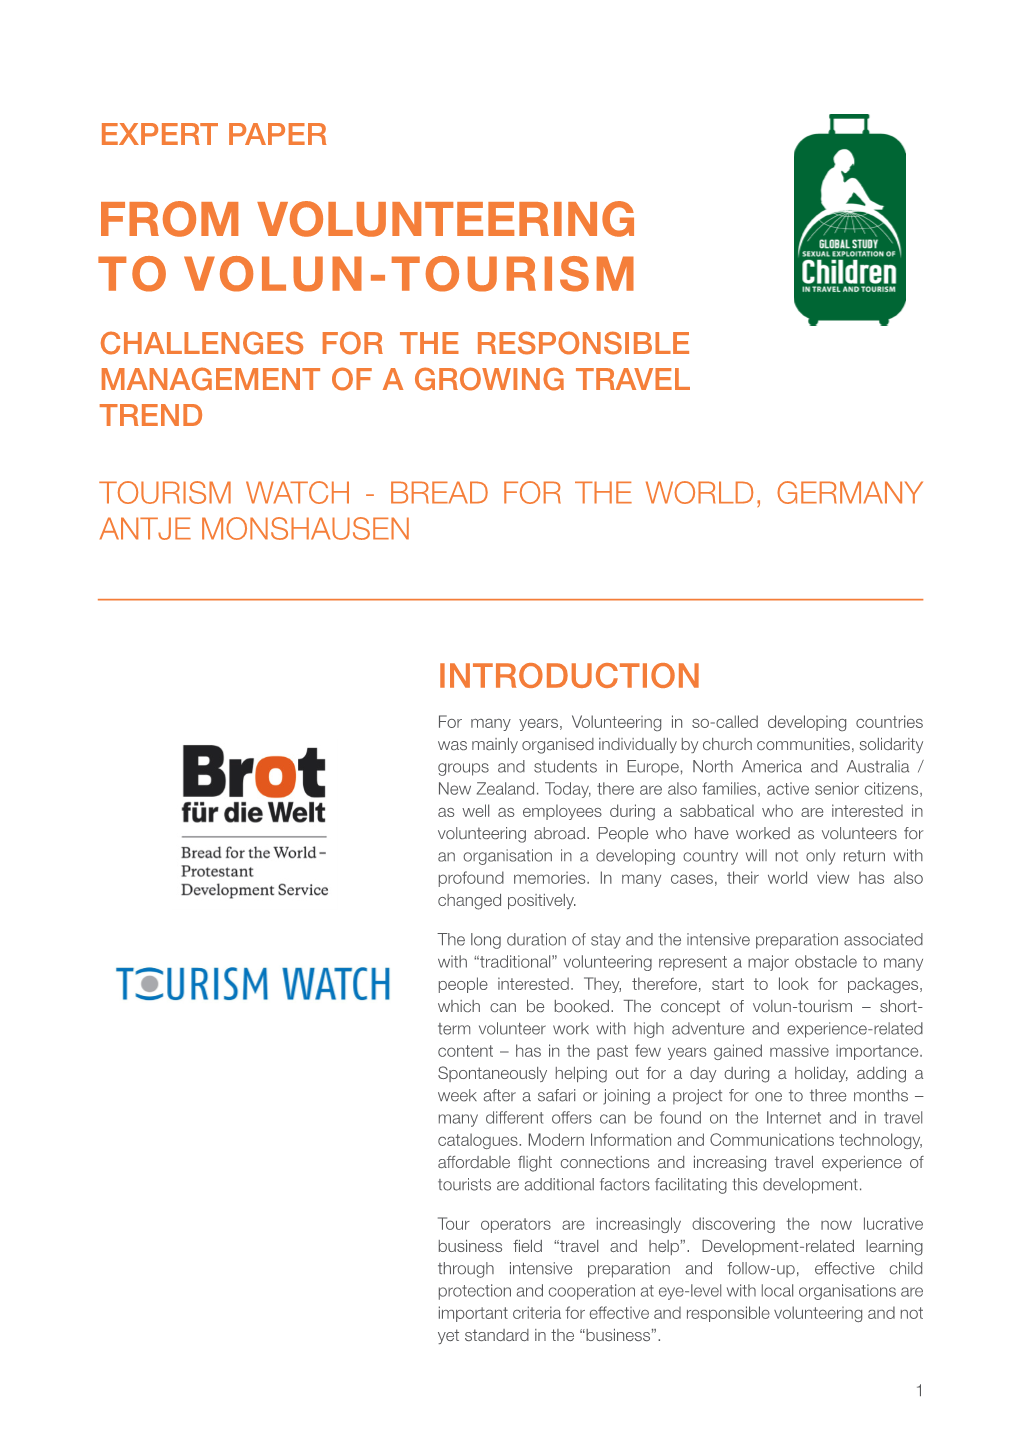 From Volunteering to Volun-Tourism Challenges for the Responsible Management of a Growing Travel Trend